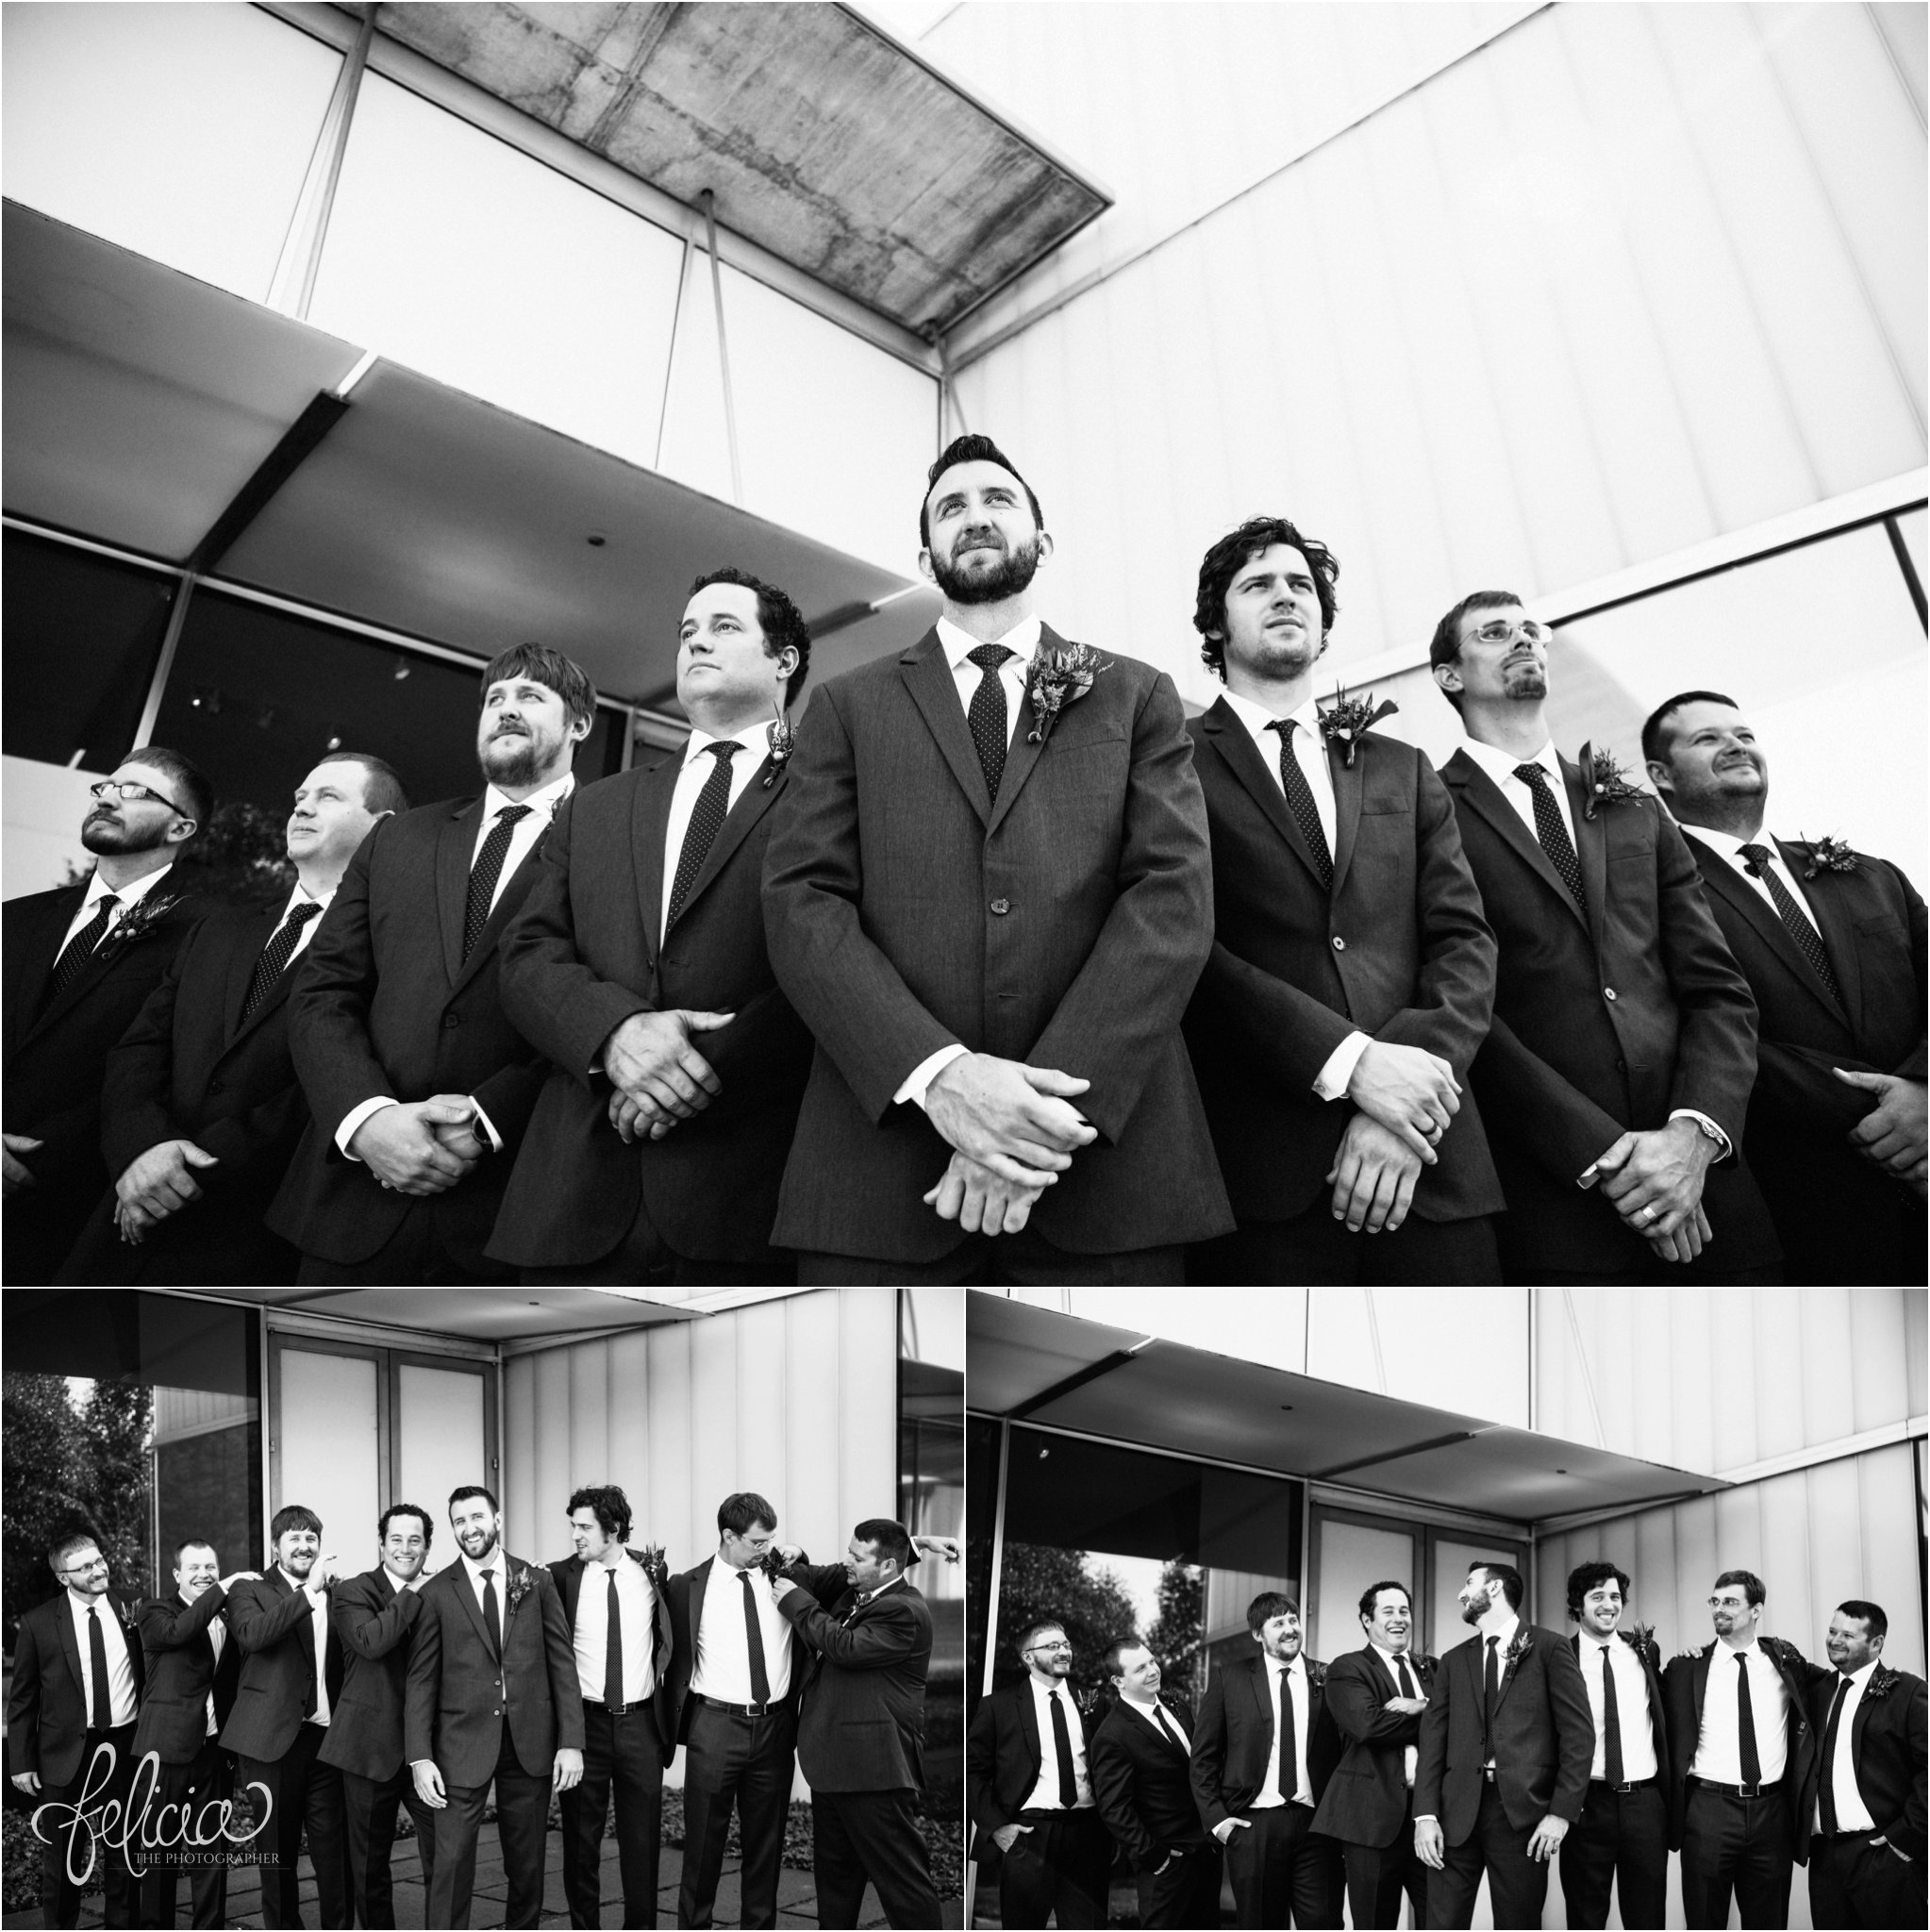 images by feliciathephotographer.com | wedding photographer | kansas city | groomsmen | portraits | game face | silly | laughter | black and white | grey suits | the black tux | 